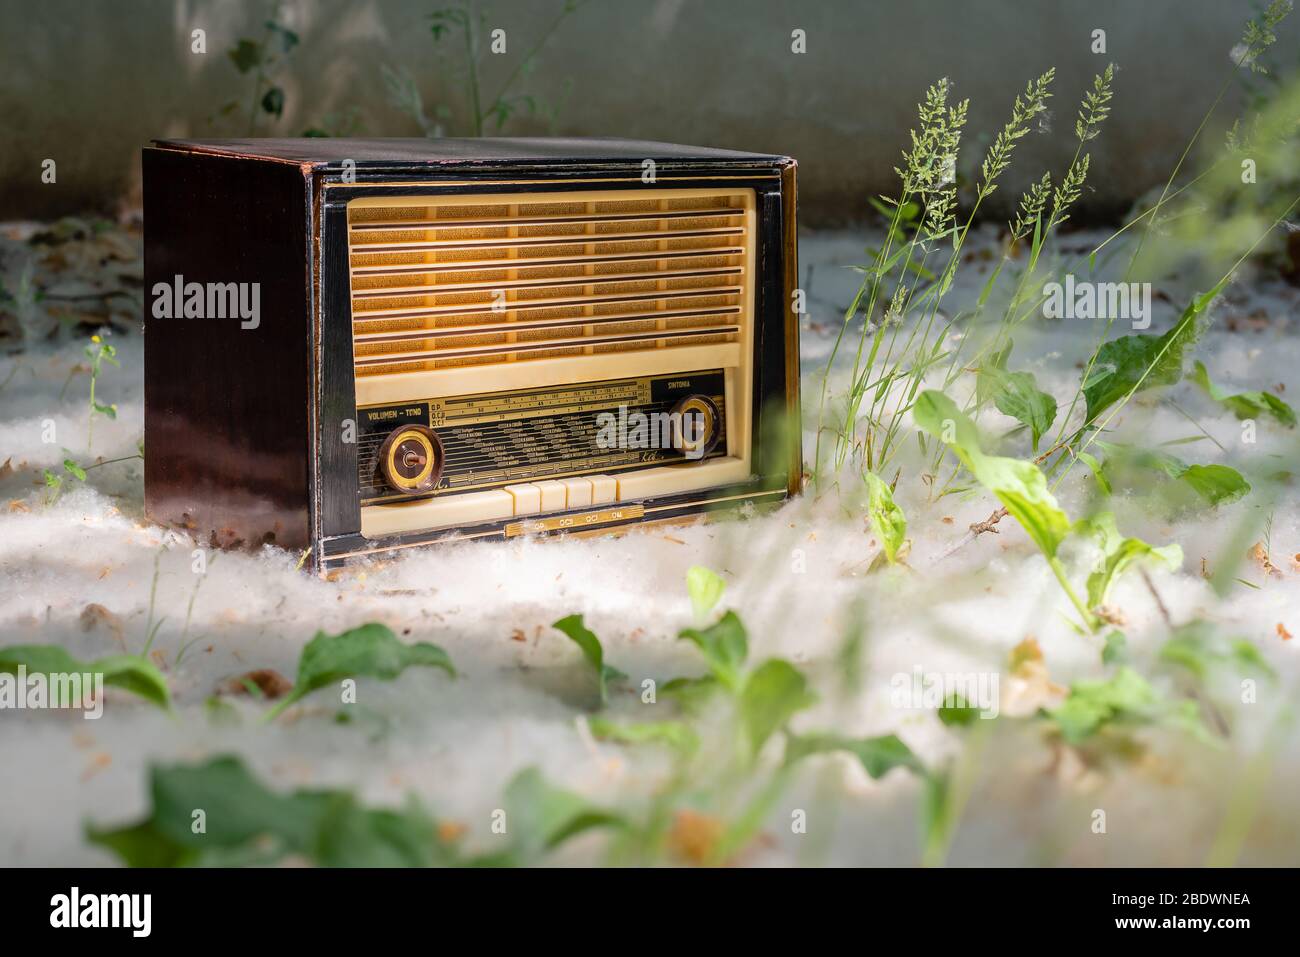 An image of floor low angle view of a vintage radio surrounded by pollen and green leaves in the countryside Stock Photo